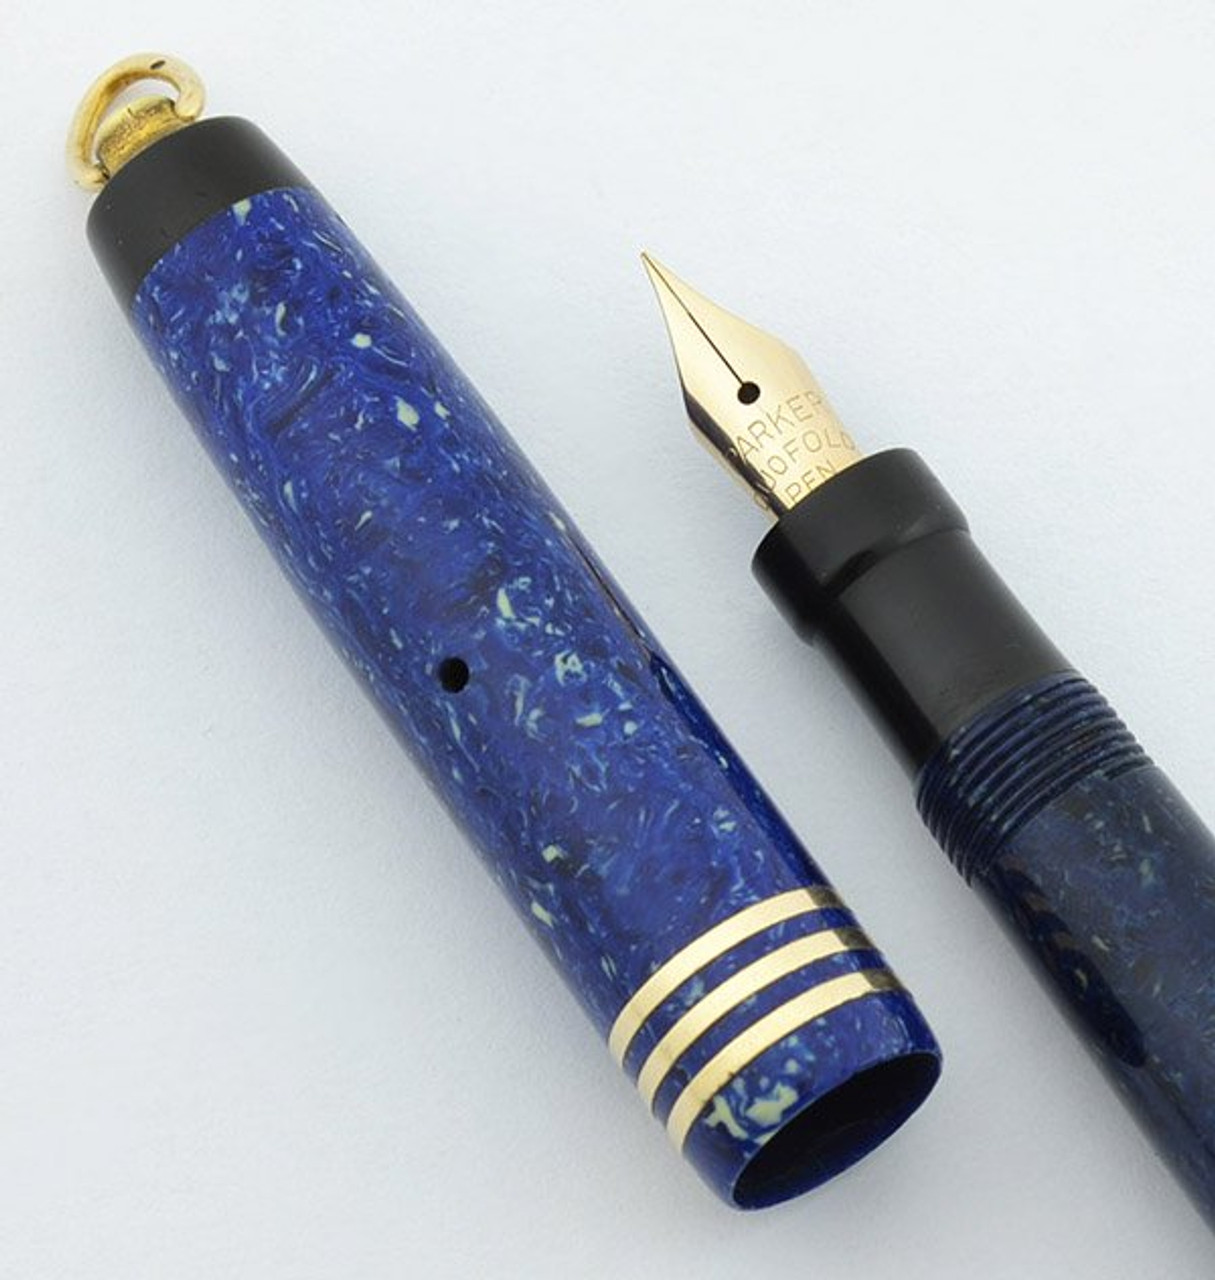 Parker Lady Duofold Fountain Pen - Streamline Ring Top, Lapis Blue, Extra Fine (Excellent, Restored)